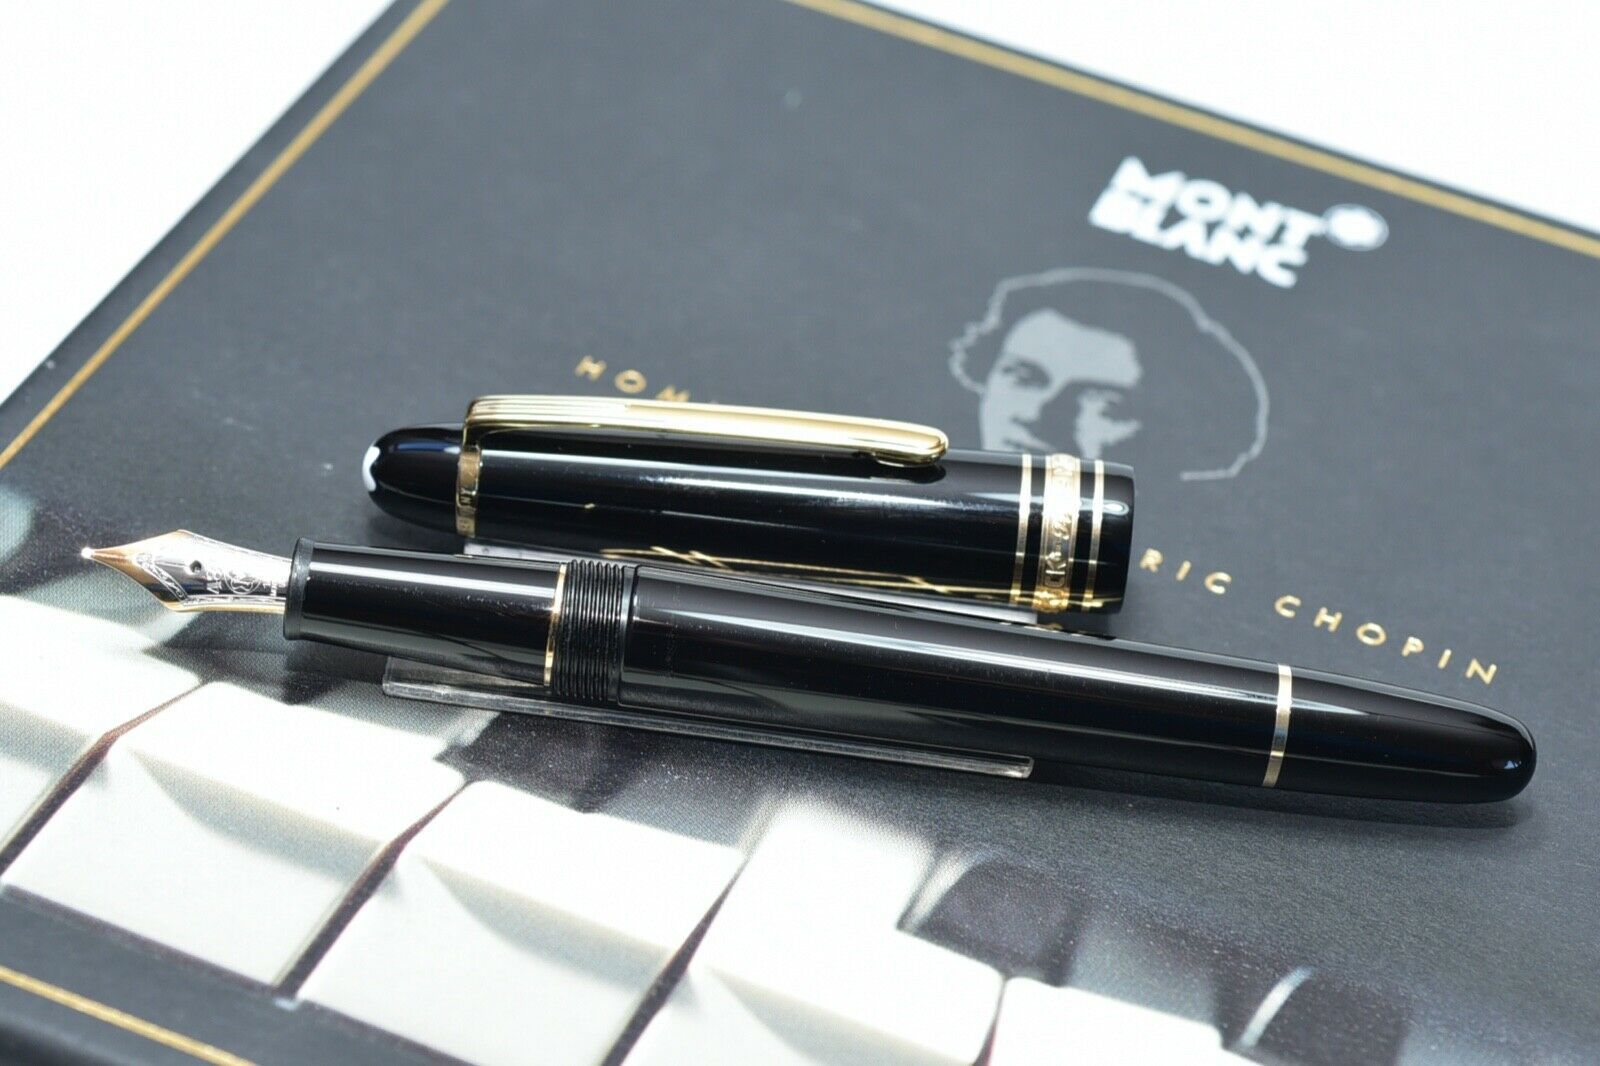 Montblanc Hommage a Frederic Chopin